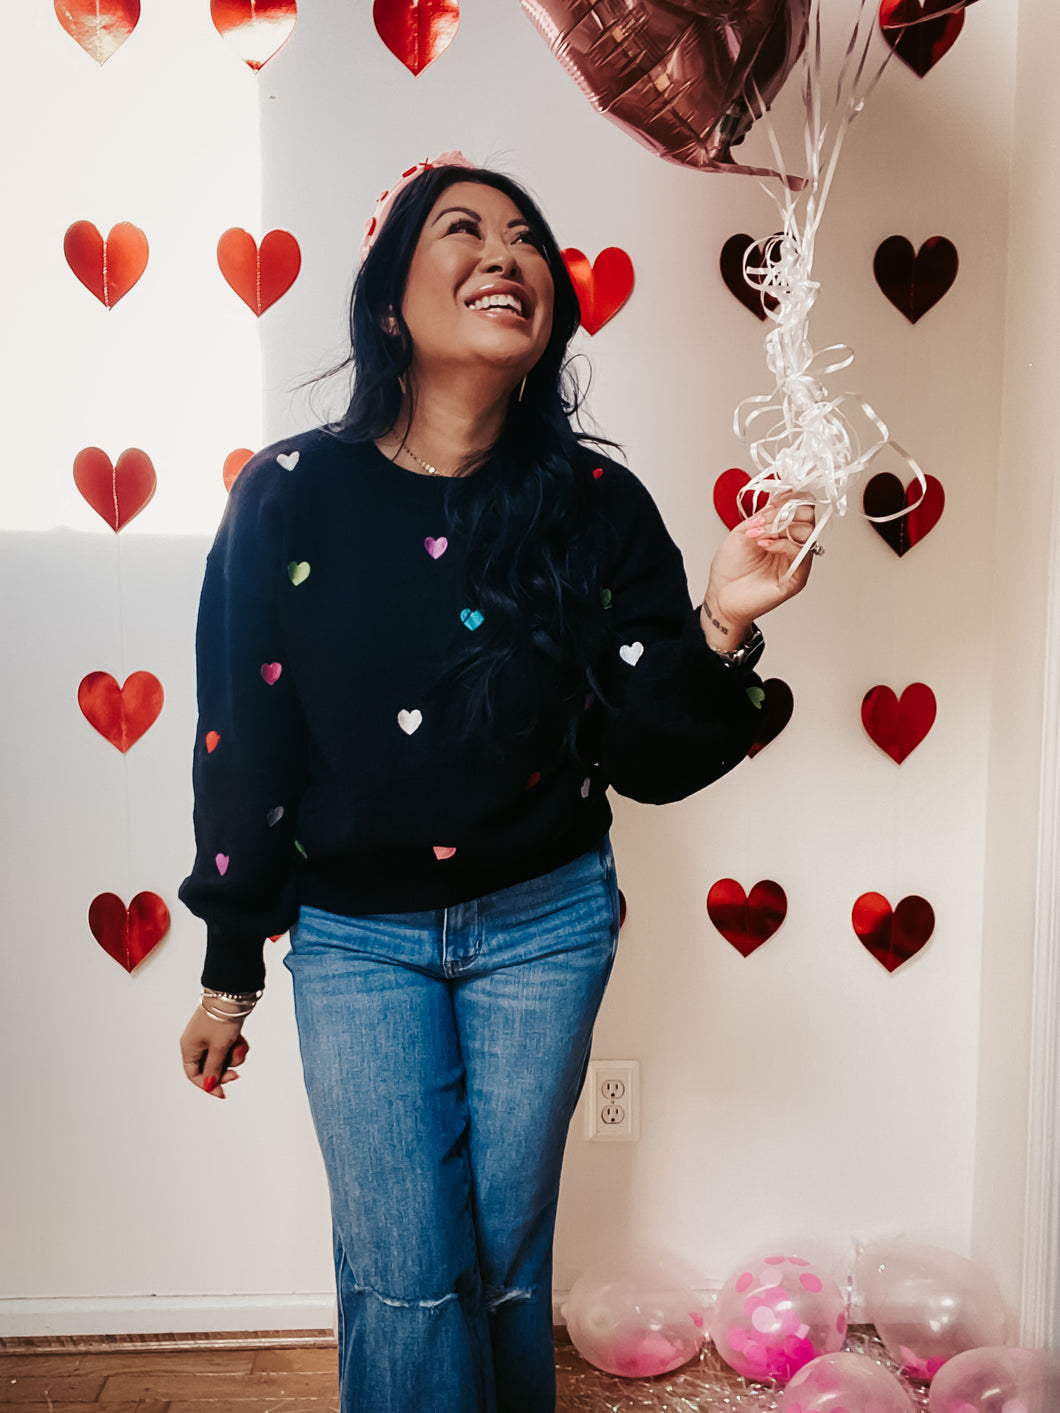 LOVE IS IN THE AIR HEARTS SWEATER